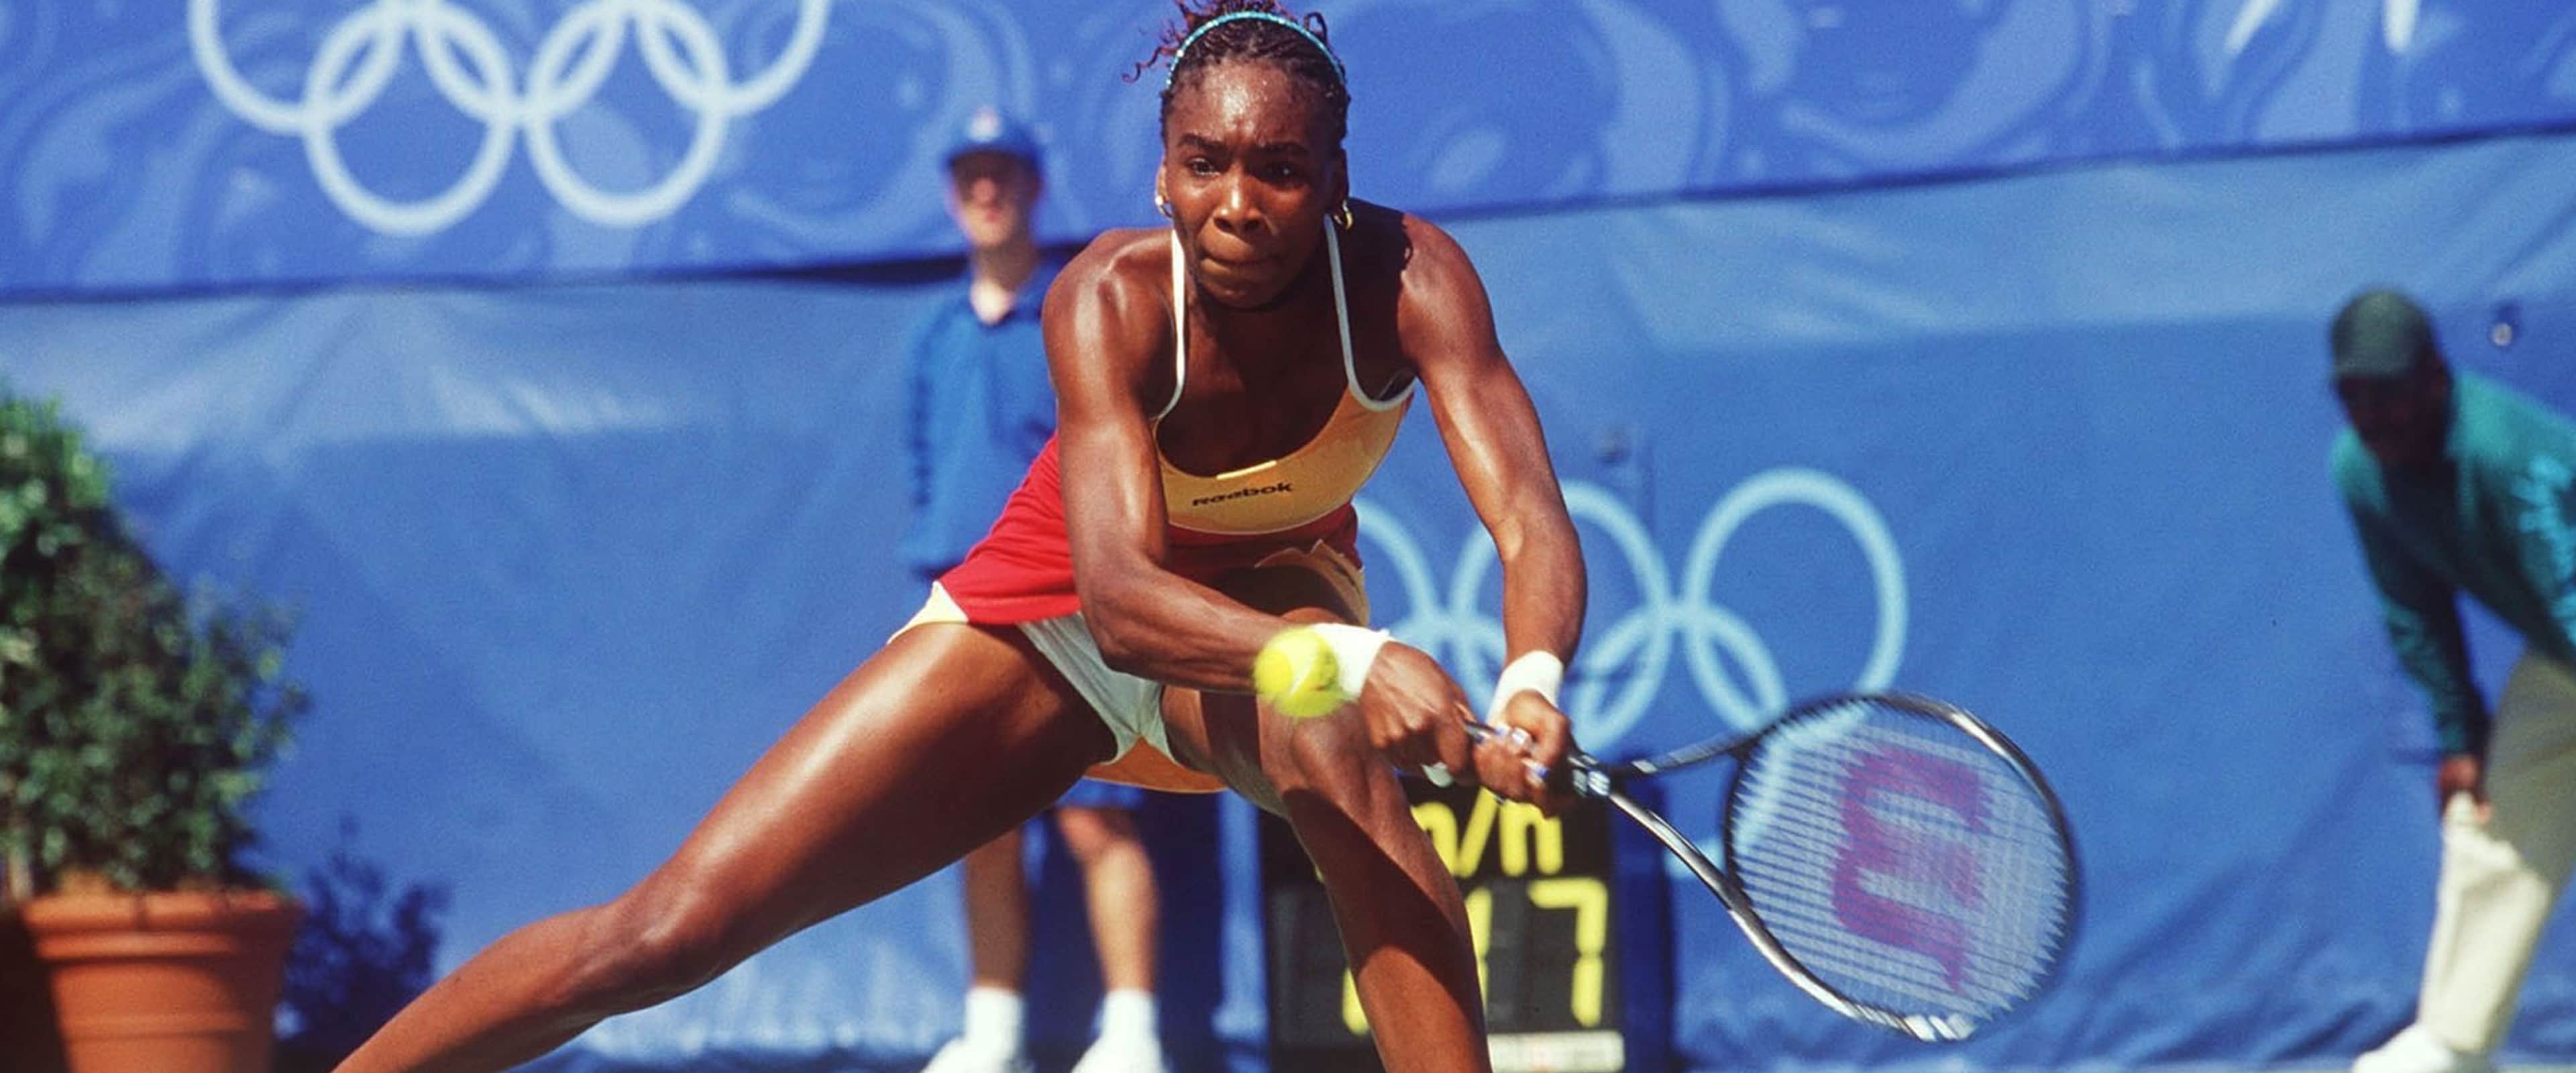 Venus Williams, First title 19 years ago, Enduring career, Olympic achievements, 3840x1600 Dual Screen Desktop